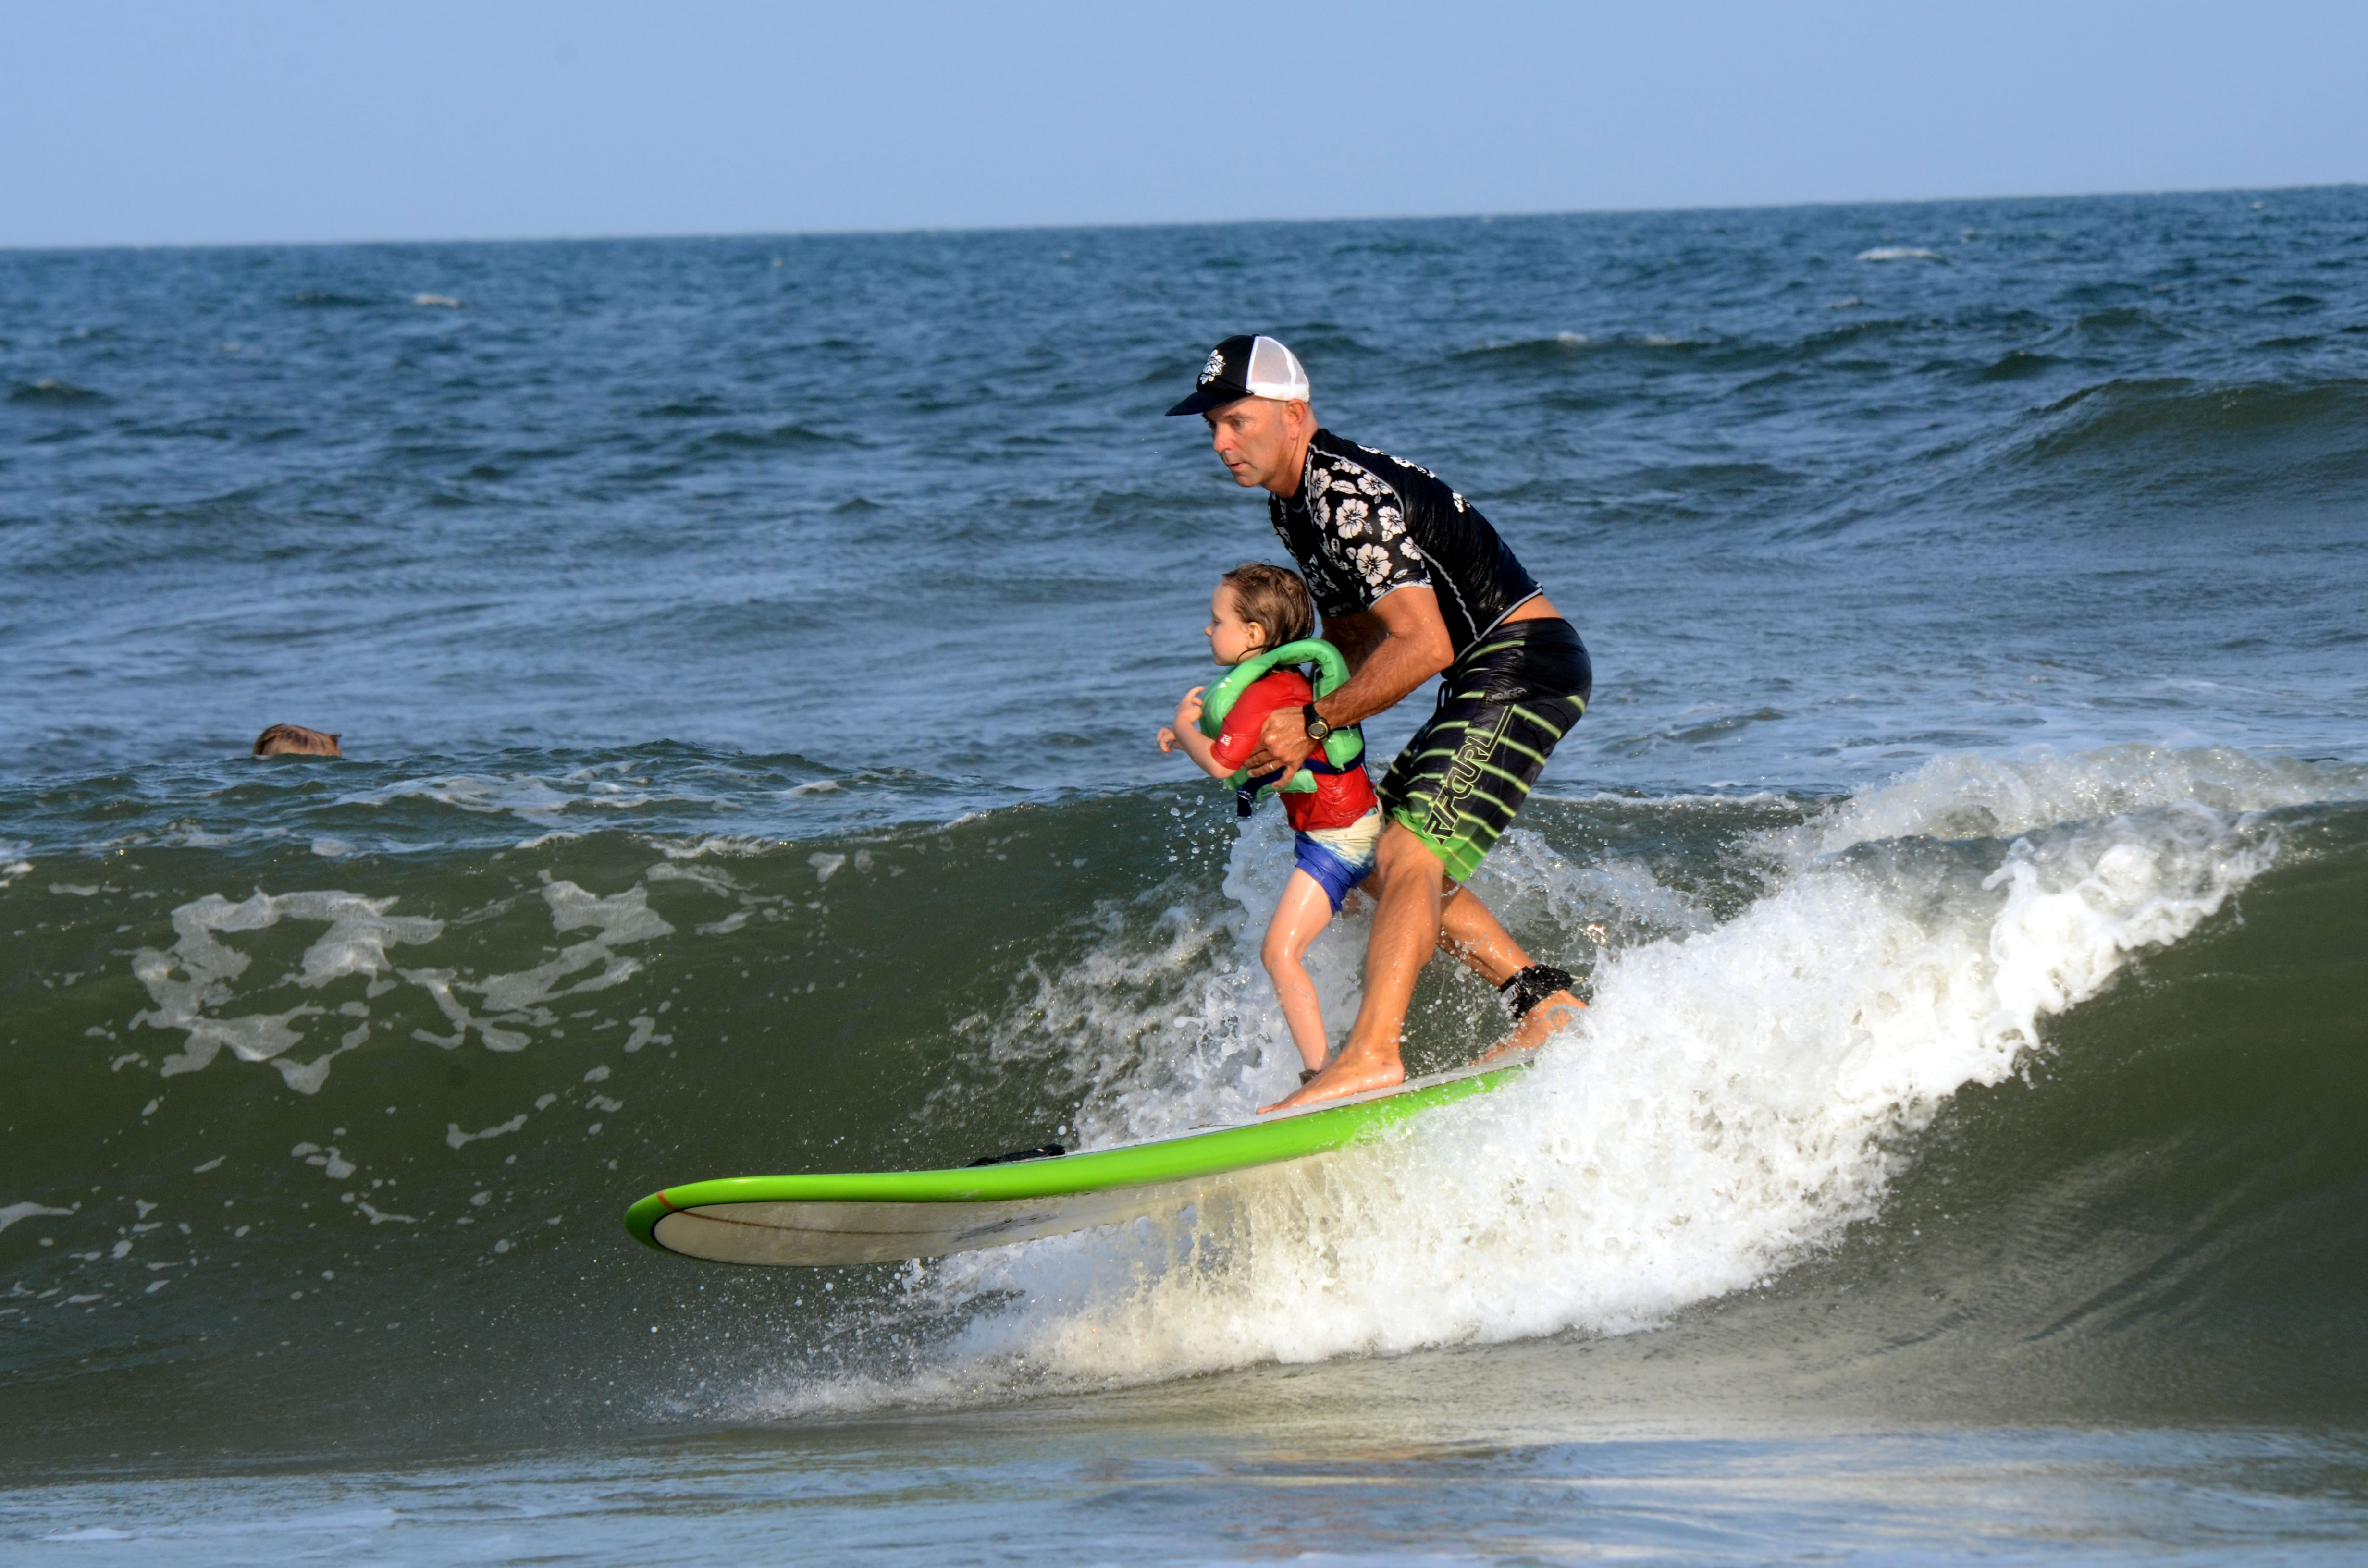 Jack Viorel, Indo Jax Surf Charities, Co-chair of the Wrightsville Beach Wahine Classic. Photo by Richard Perry